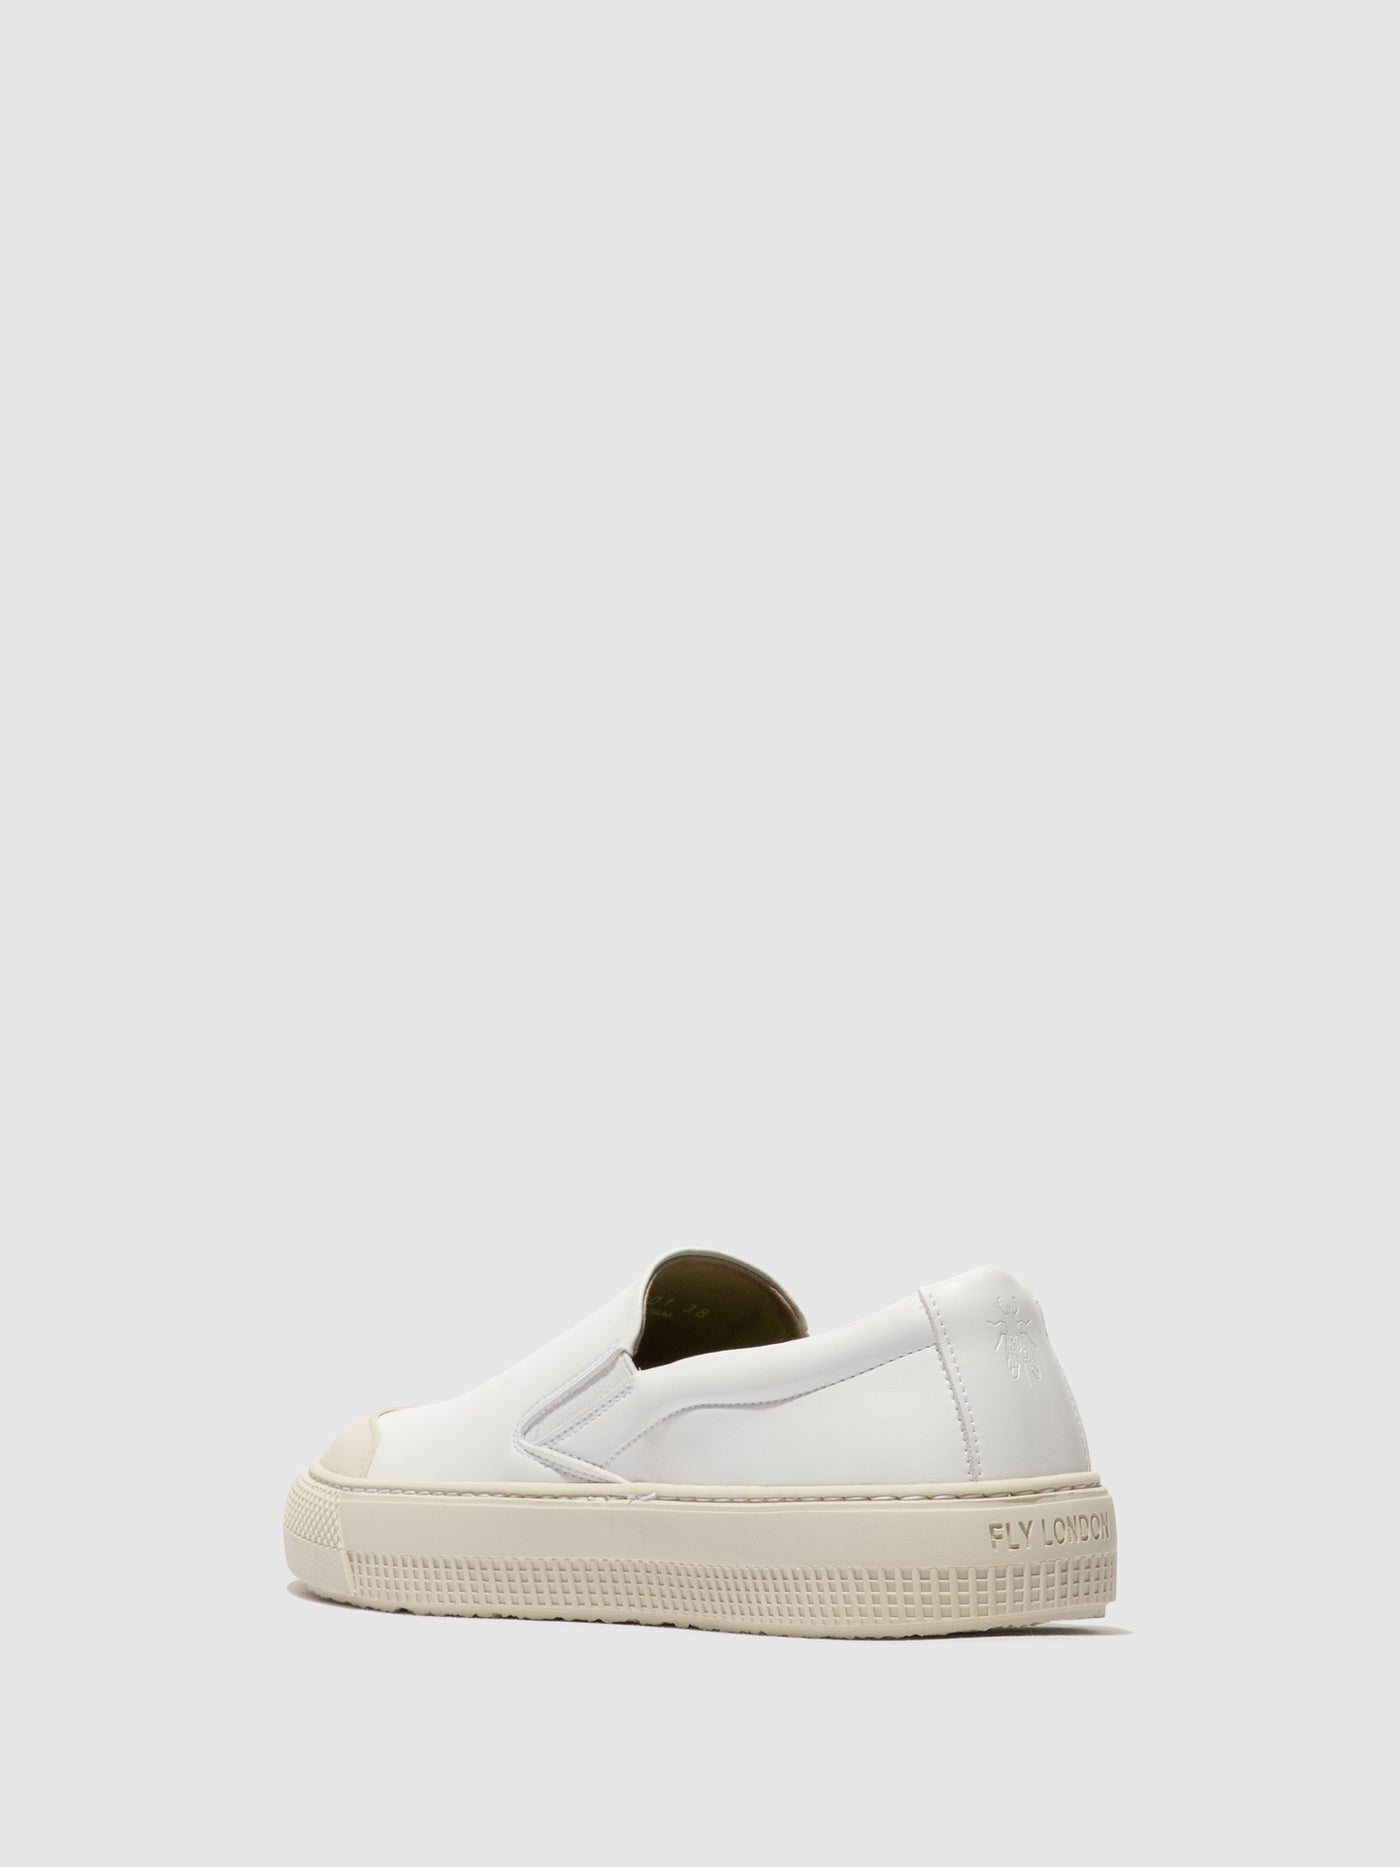 Slip-on Trainers TOAF584FLY WHITE